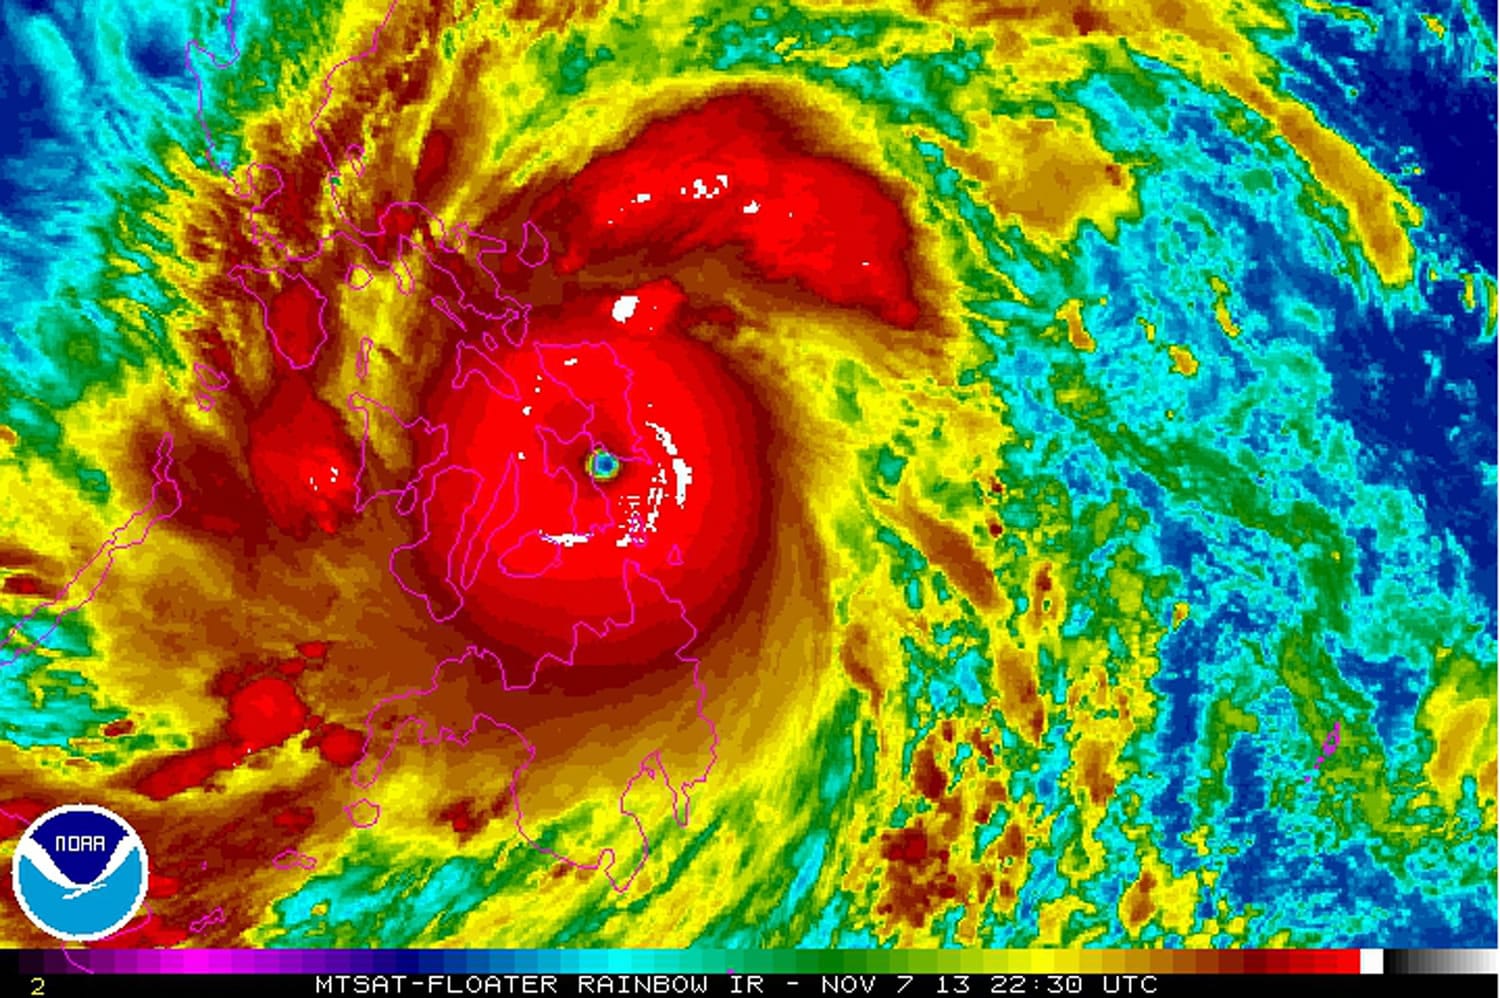 A satellite image provided by the National Oceanic and Atmospheric Administration shows Typhoon Haiyan over the Philippines, at 22:30 UTC (5:30 p.m. EST). Haiyan, the world's strongest typhoon of the year, slammed into the Philippines early Friday.